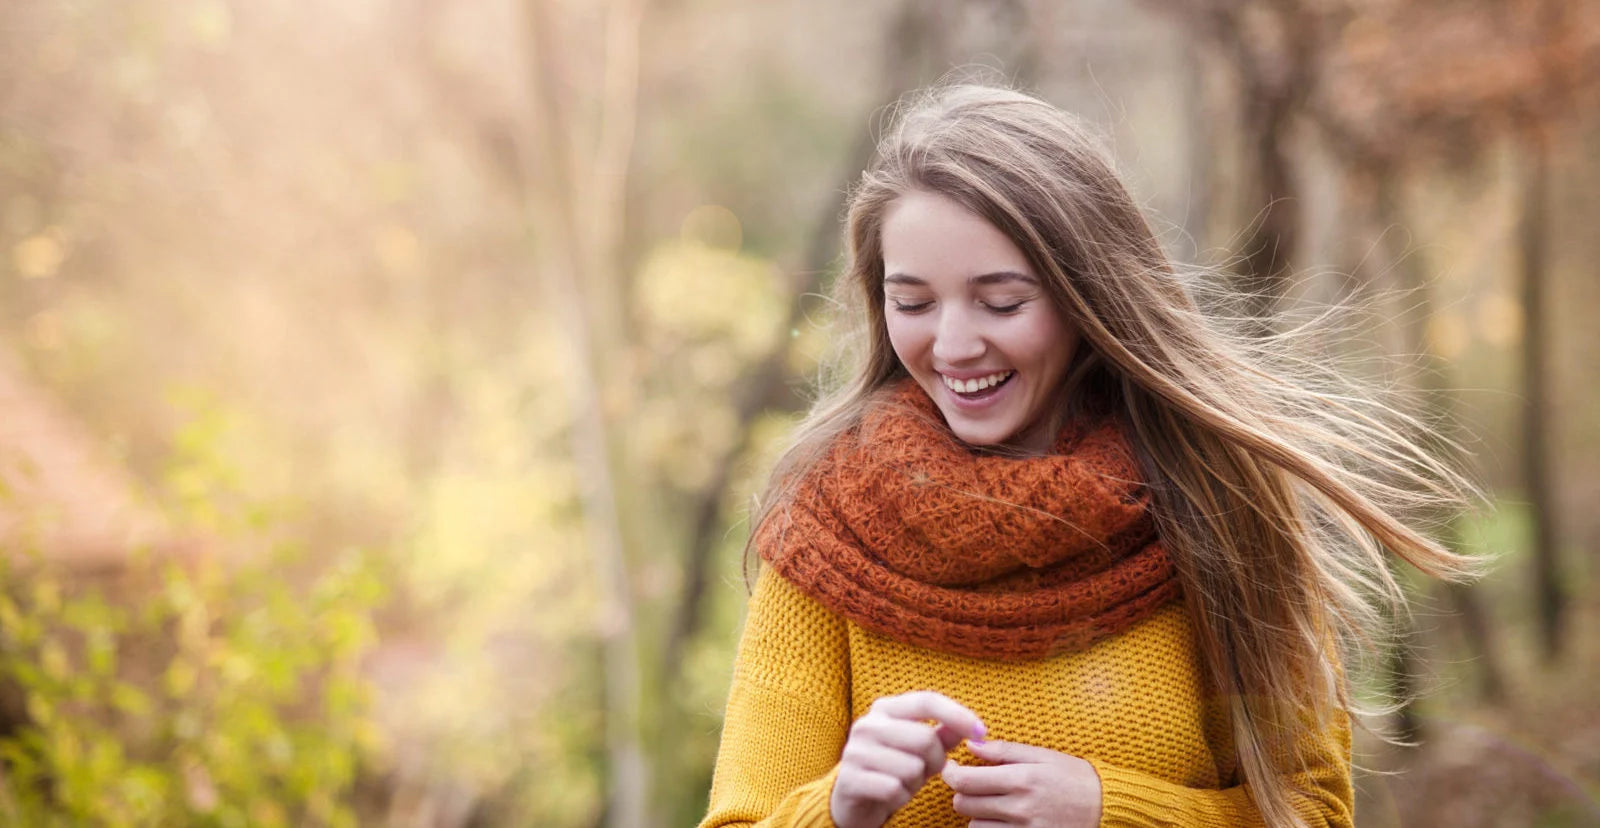 woman smiling outdoor during the fall month